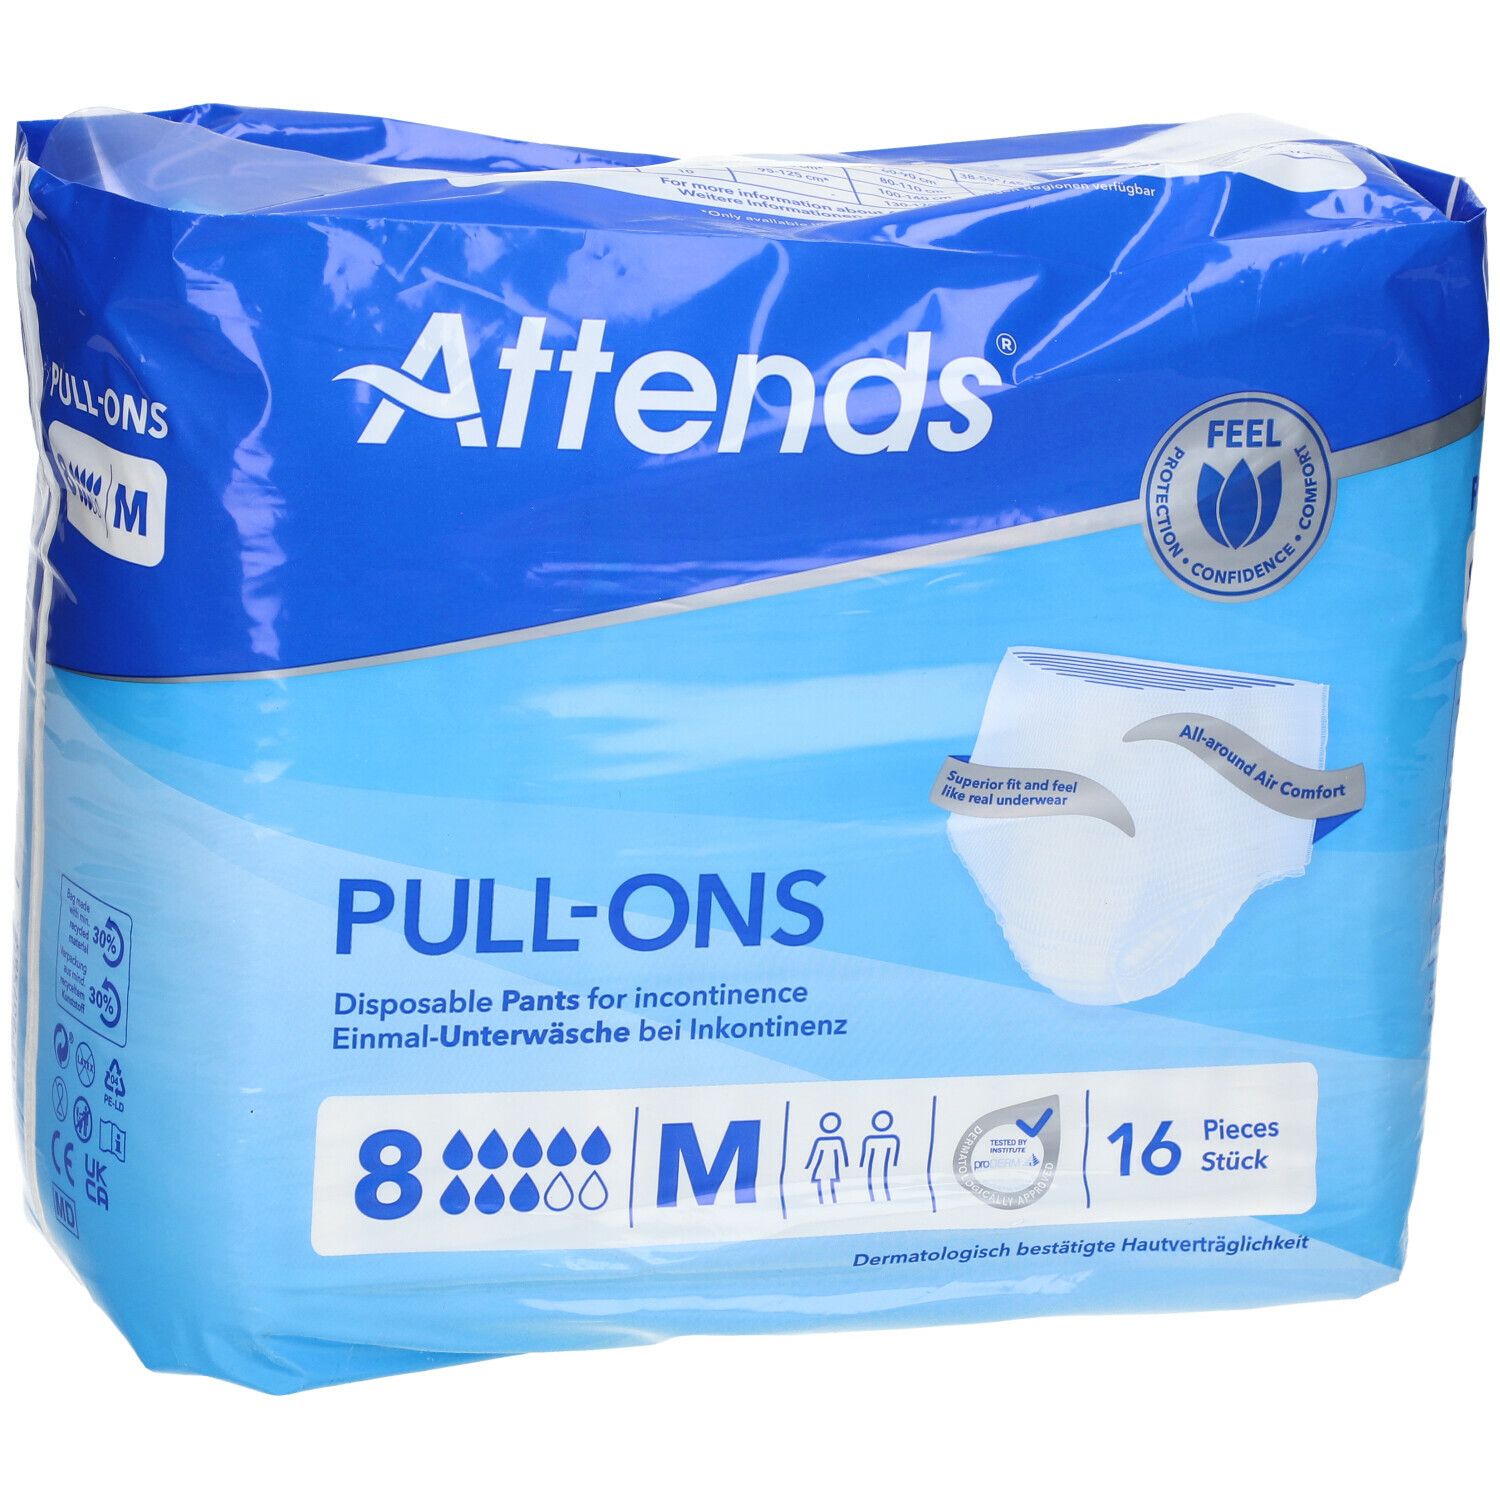 Attends Pull-Ons 8M - Pack of 16 Medium Disposable Incontinence Pants